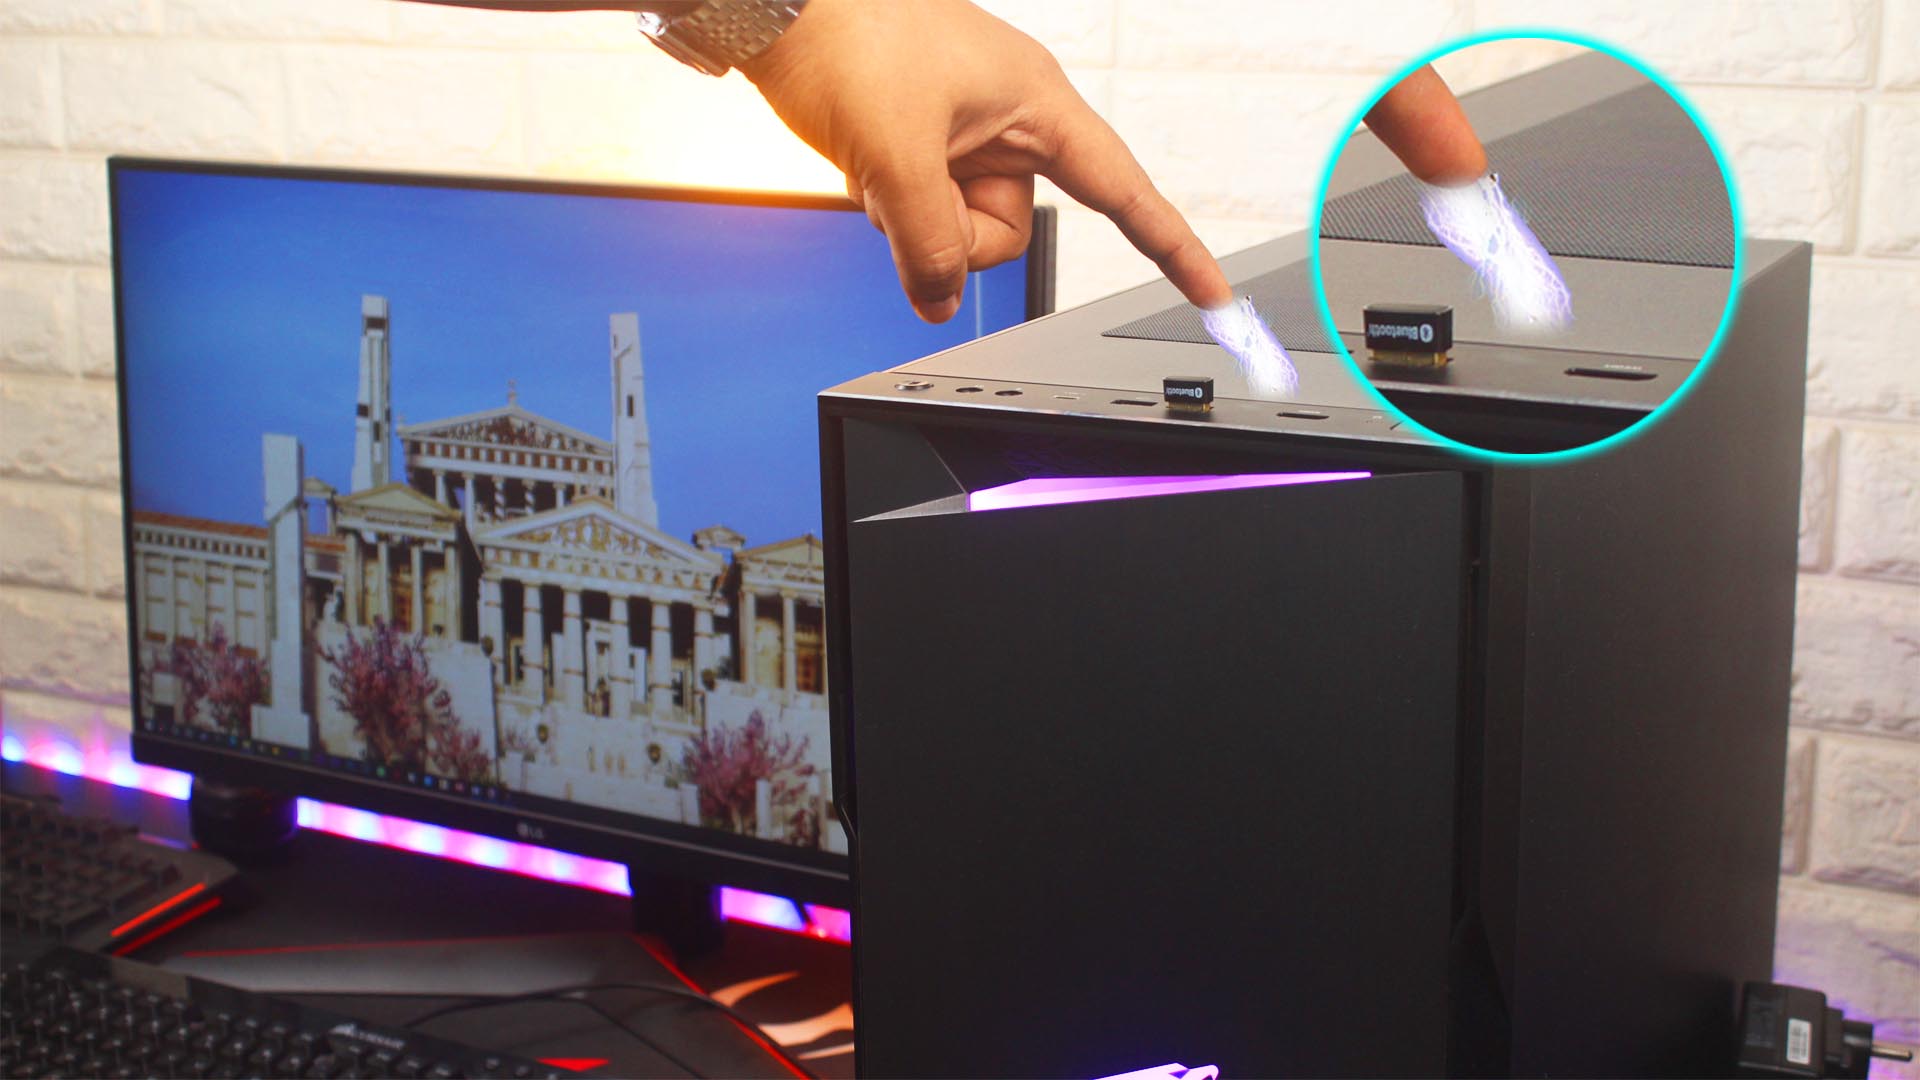 Why Do I Get A Shock When Touching A PC Case